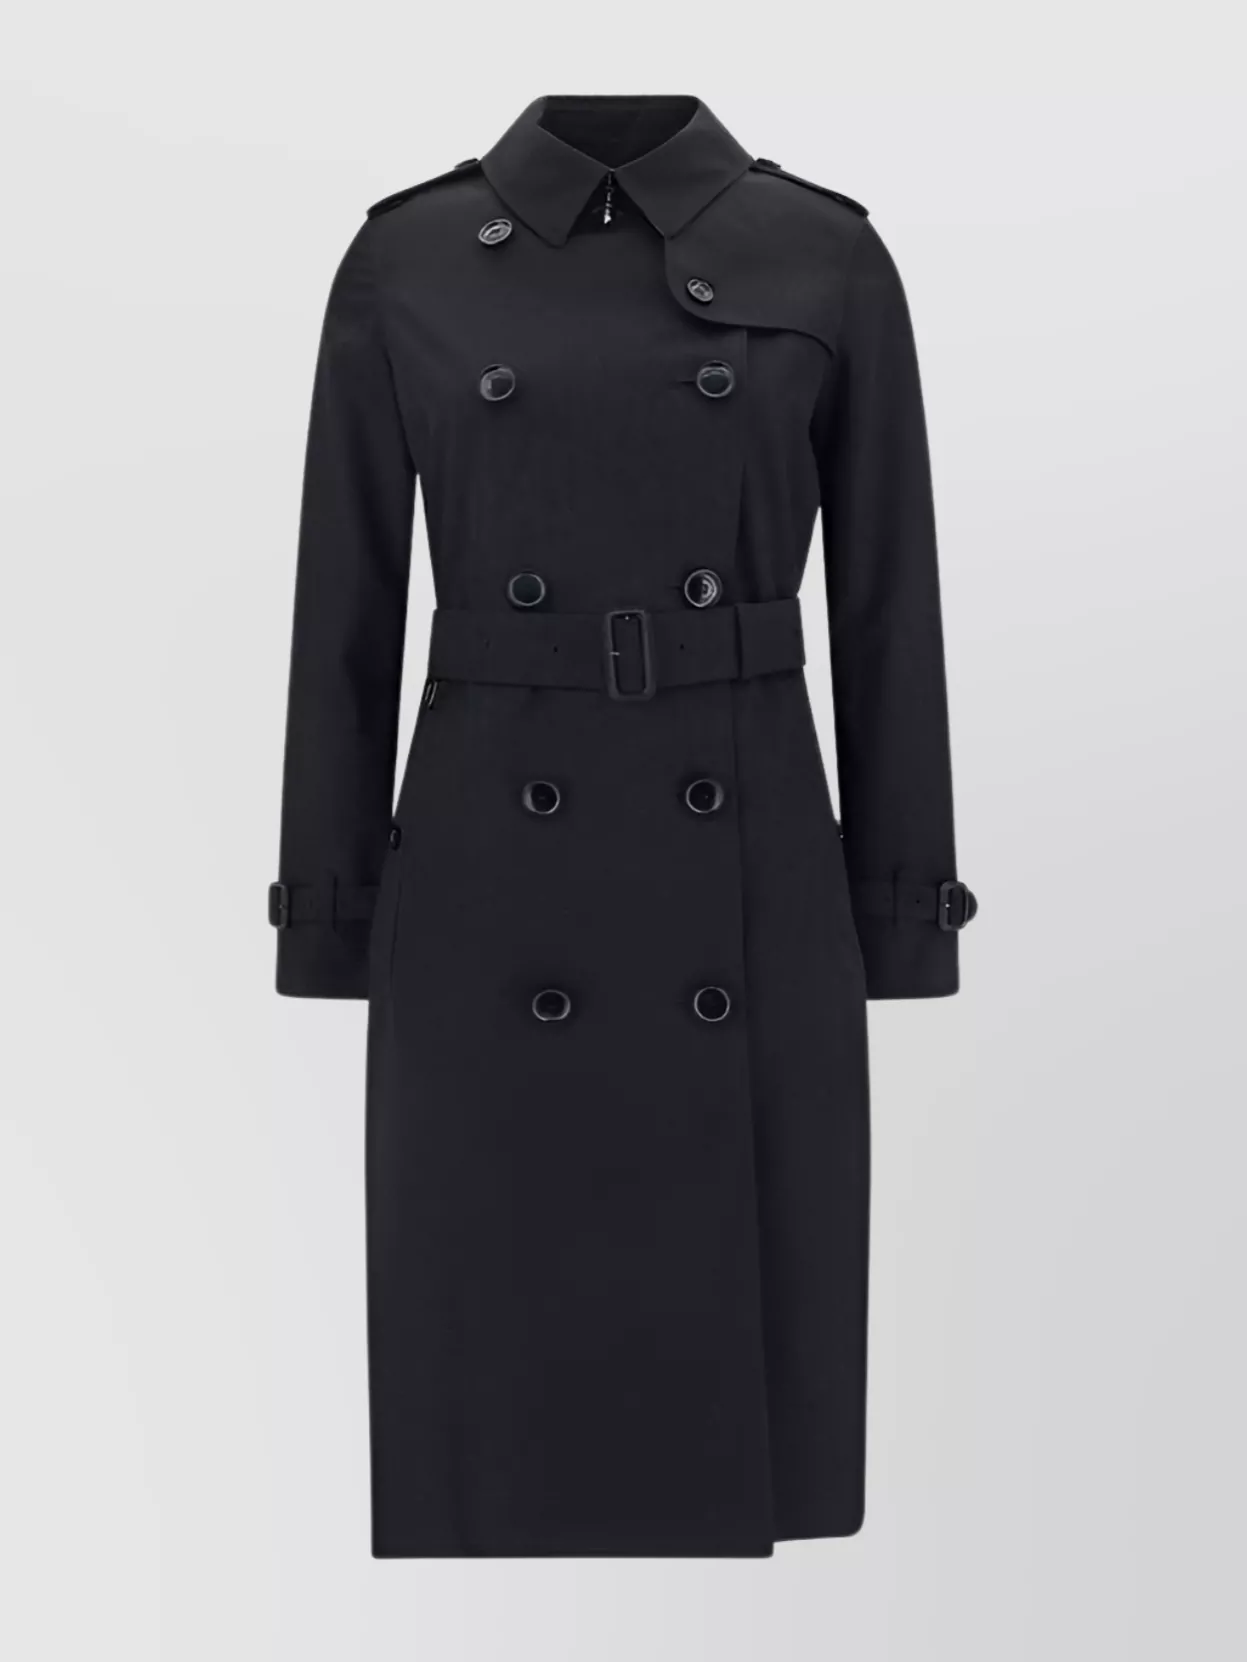 Burberry Belted Double-breasted Trench Coat Epaulettes In Black